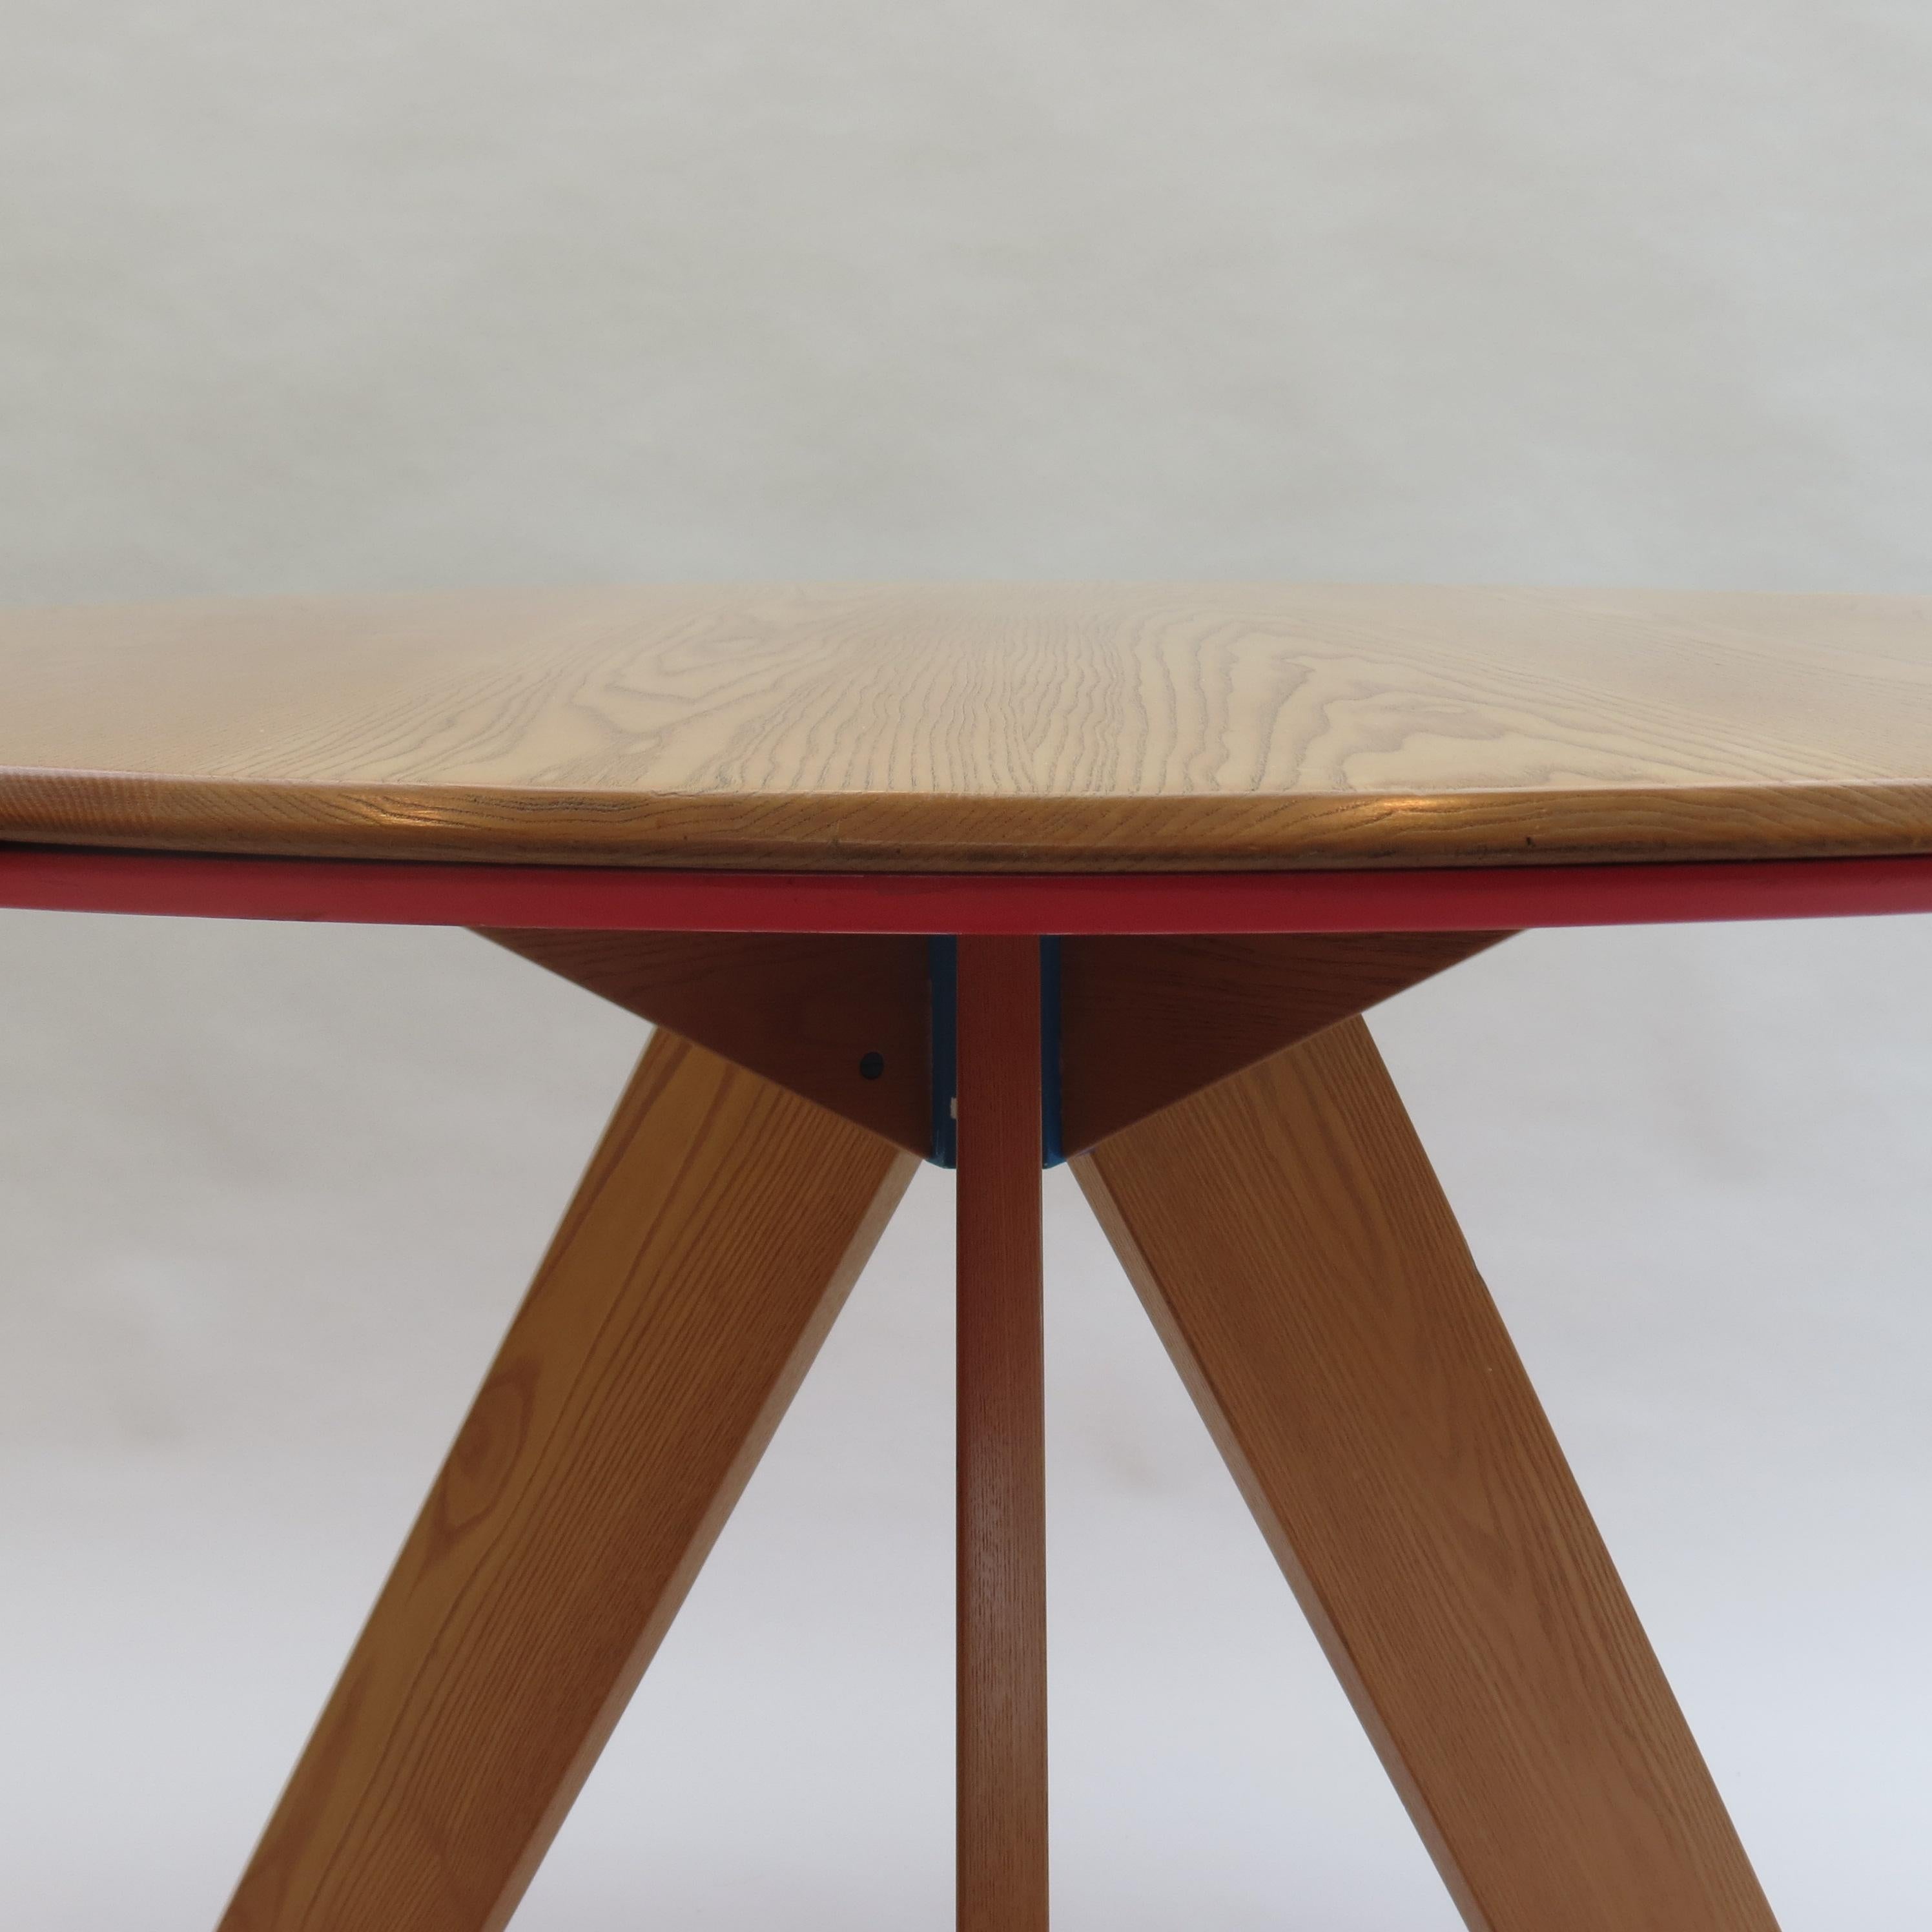 Midcentury Bespoke Round Dining Table by David Field 1980s with Red Blue Detail 3